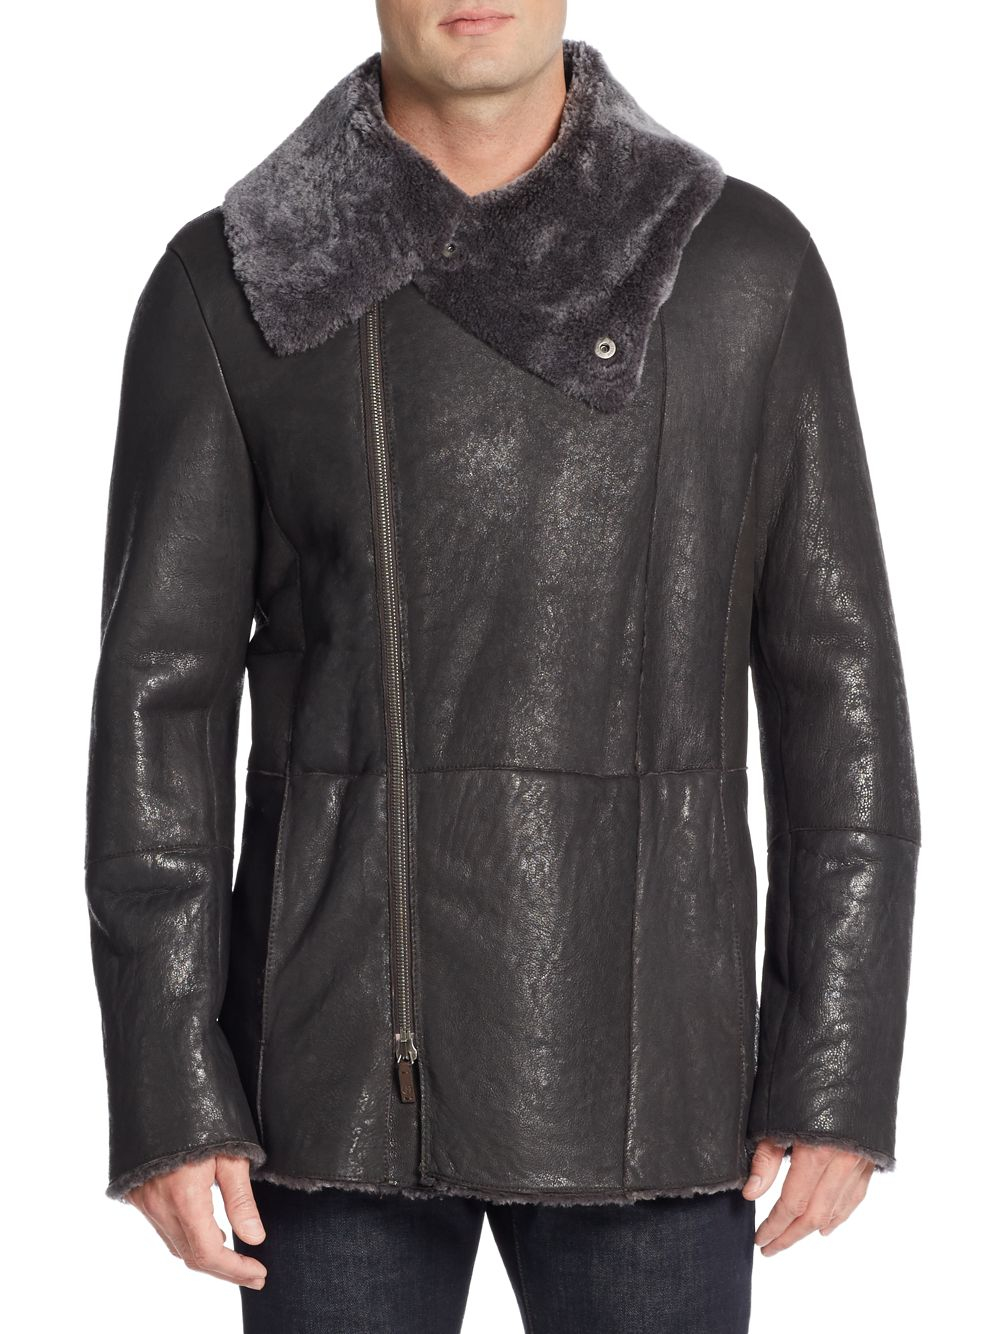 Giorgio armani Caban Shearling-Trimmed Leather Coat in Black for Men | Lyst